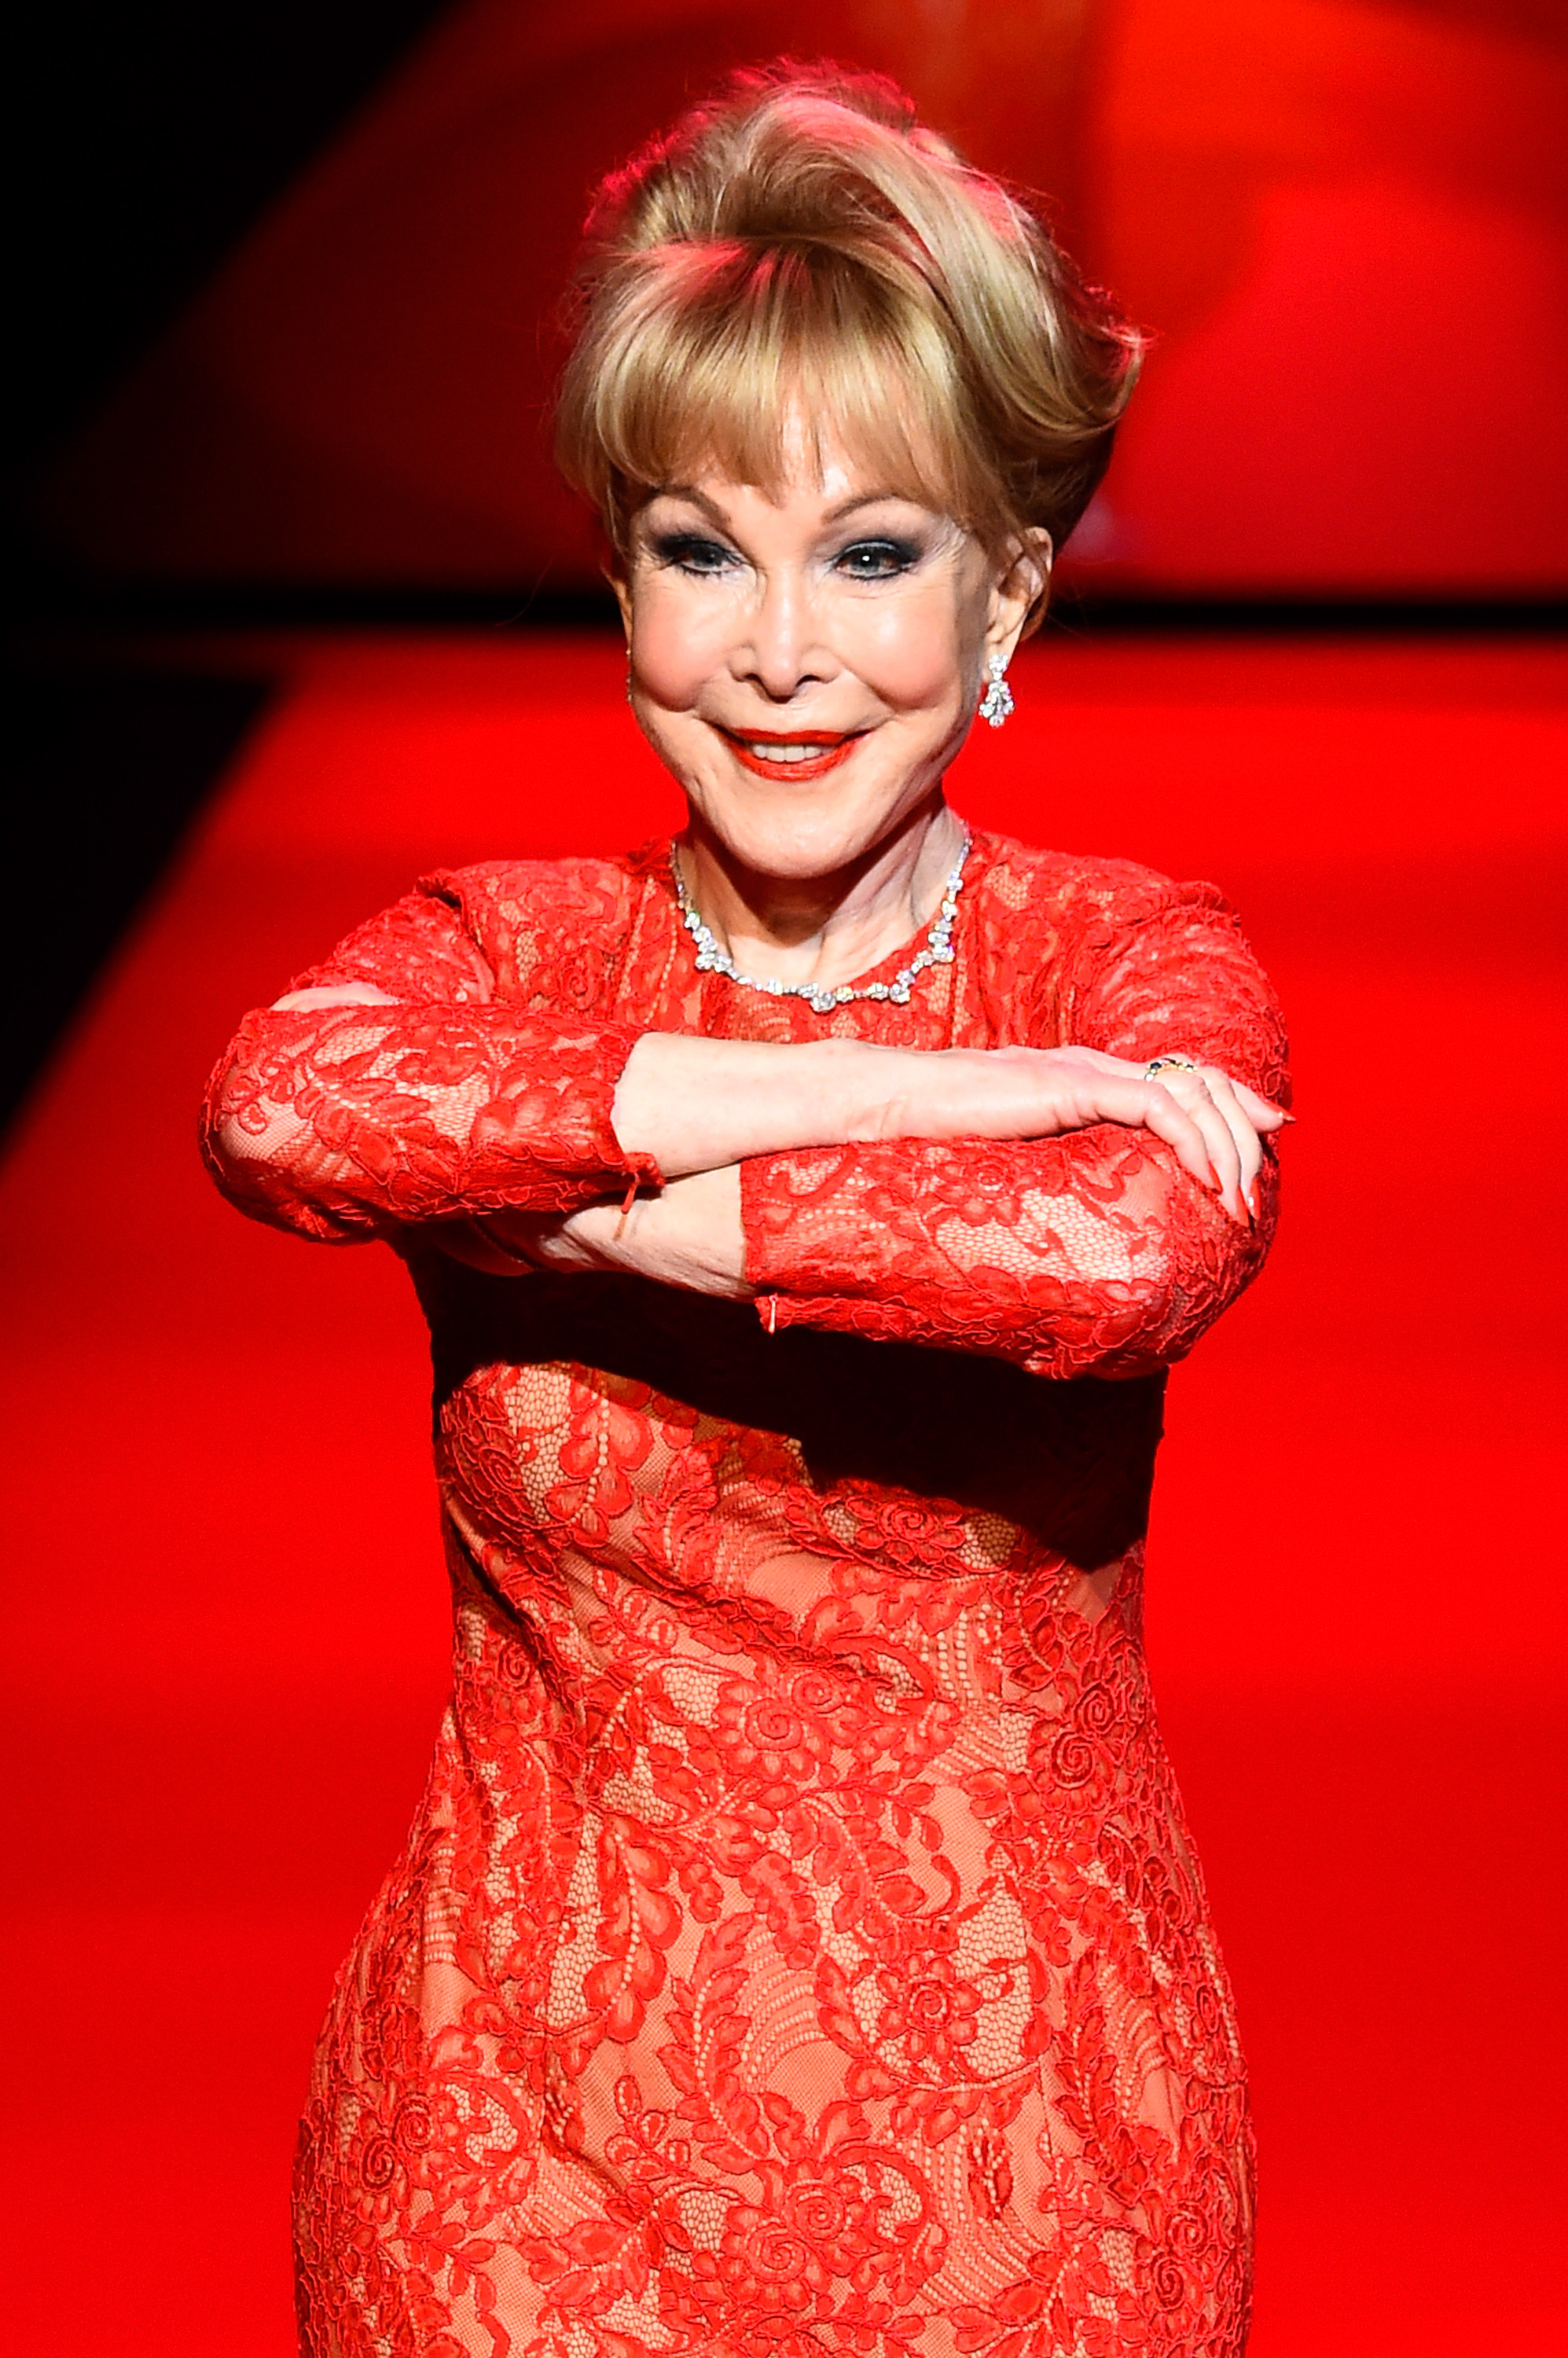 Barbara Eden walks the runway at the Go Red For Women Red Dress Collection 2015 presented by Macy's fashion show during Mercedes-Benz Fashion Week Fall 2015 on February 12, 2015, in New York City. | Source: Getty Images